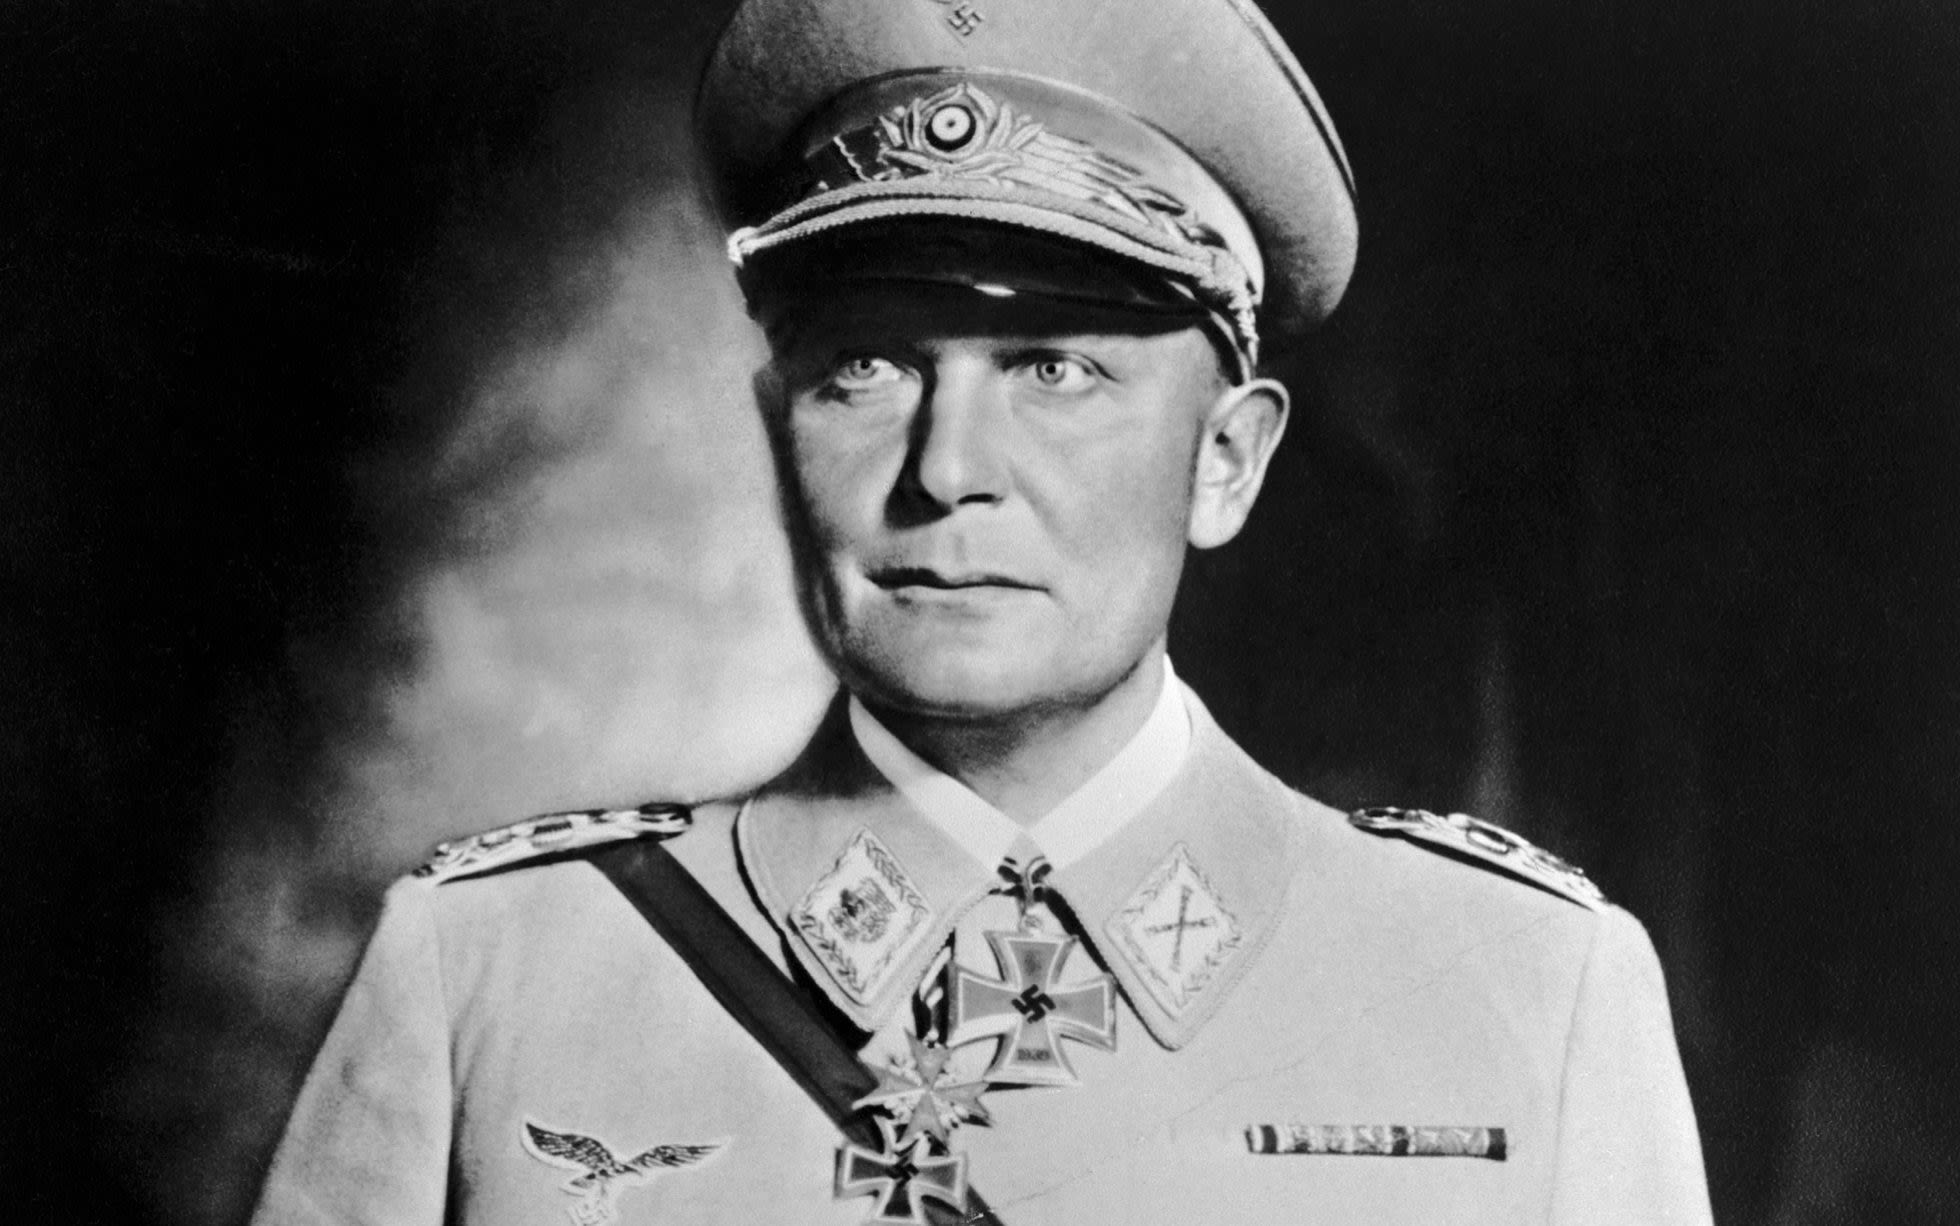 Skeletons with missing hands and feet found under Goering’s bunker